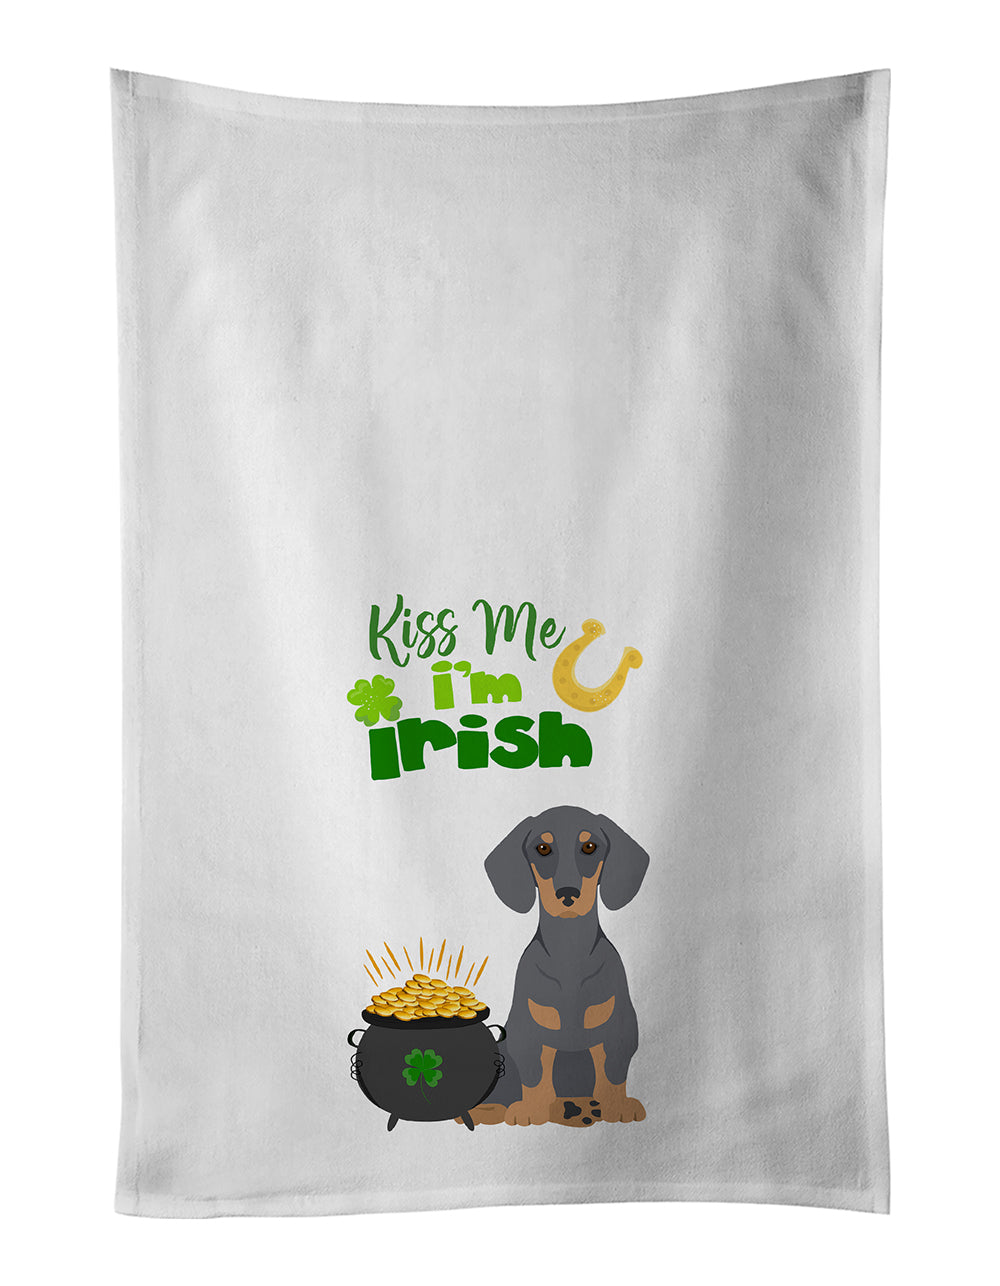 Buy this Blue and Tan Dachshund St. Patrick's Day White Kitchen Towel Set of 2 Dish Towels